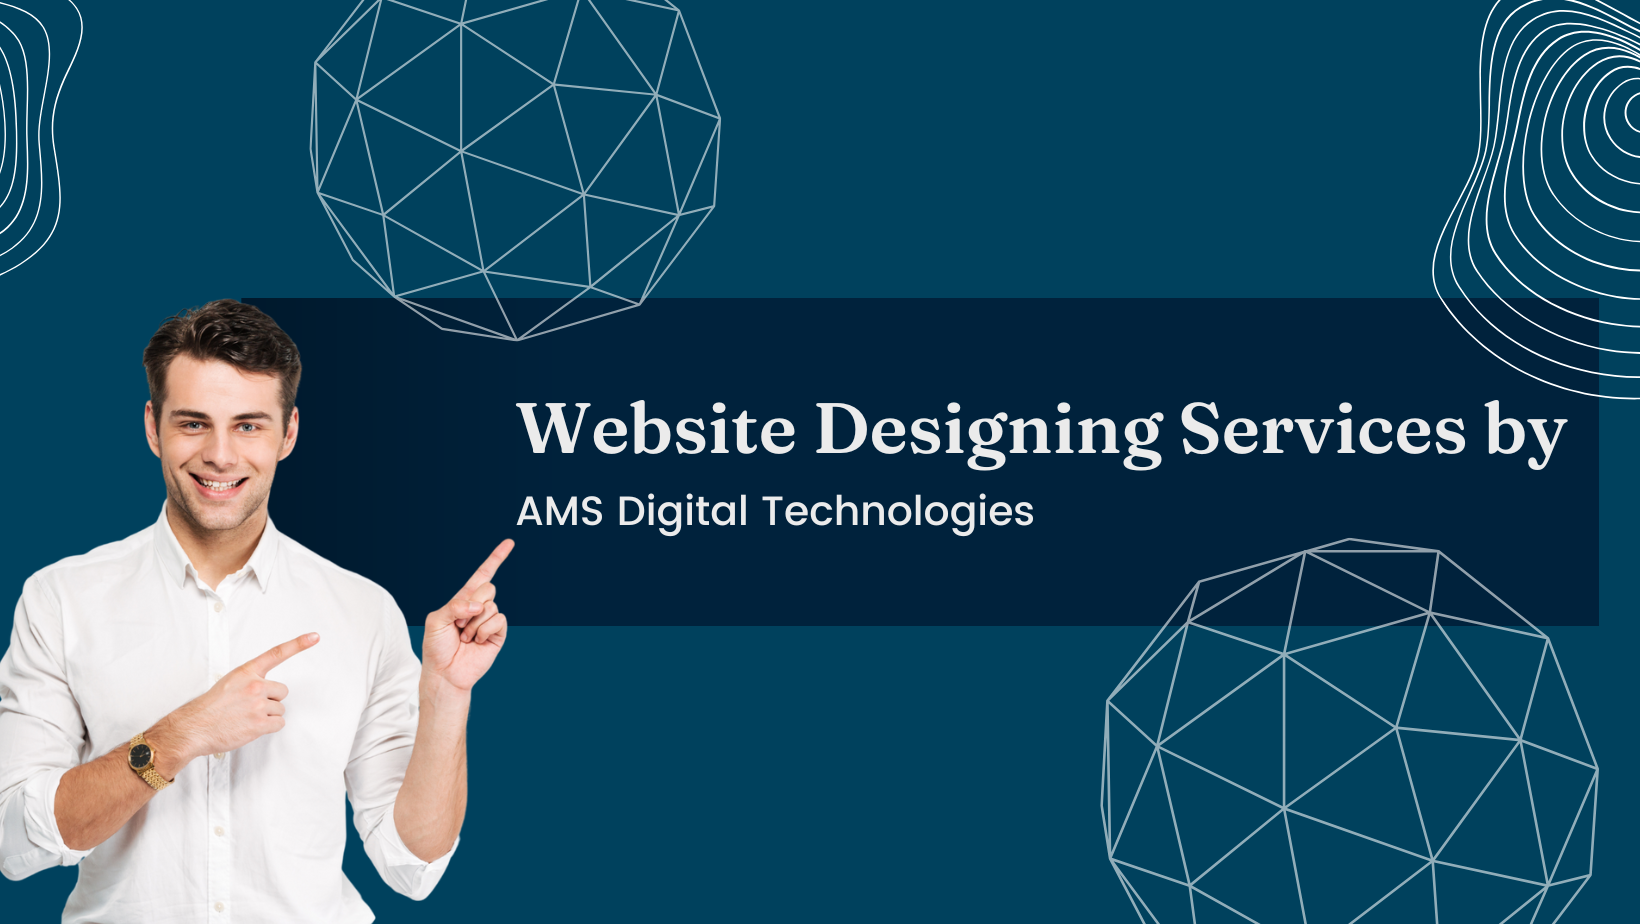 Website Designing Services by AMS Digital Technologies